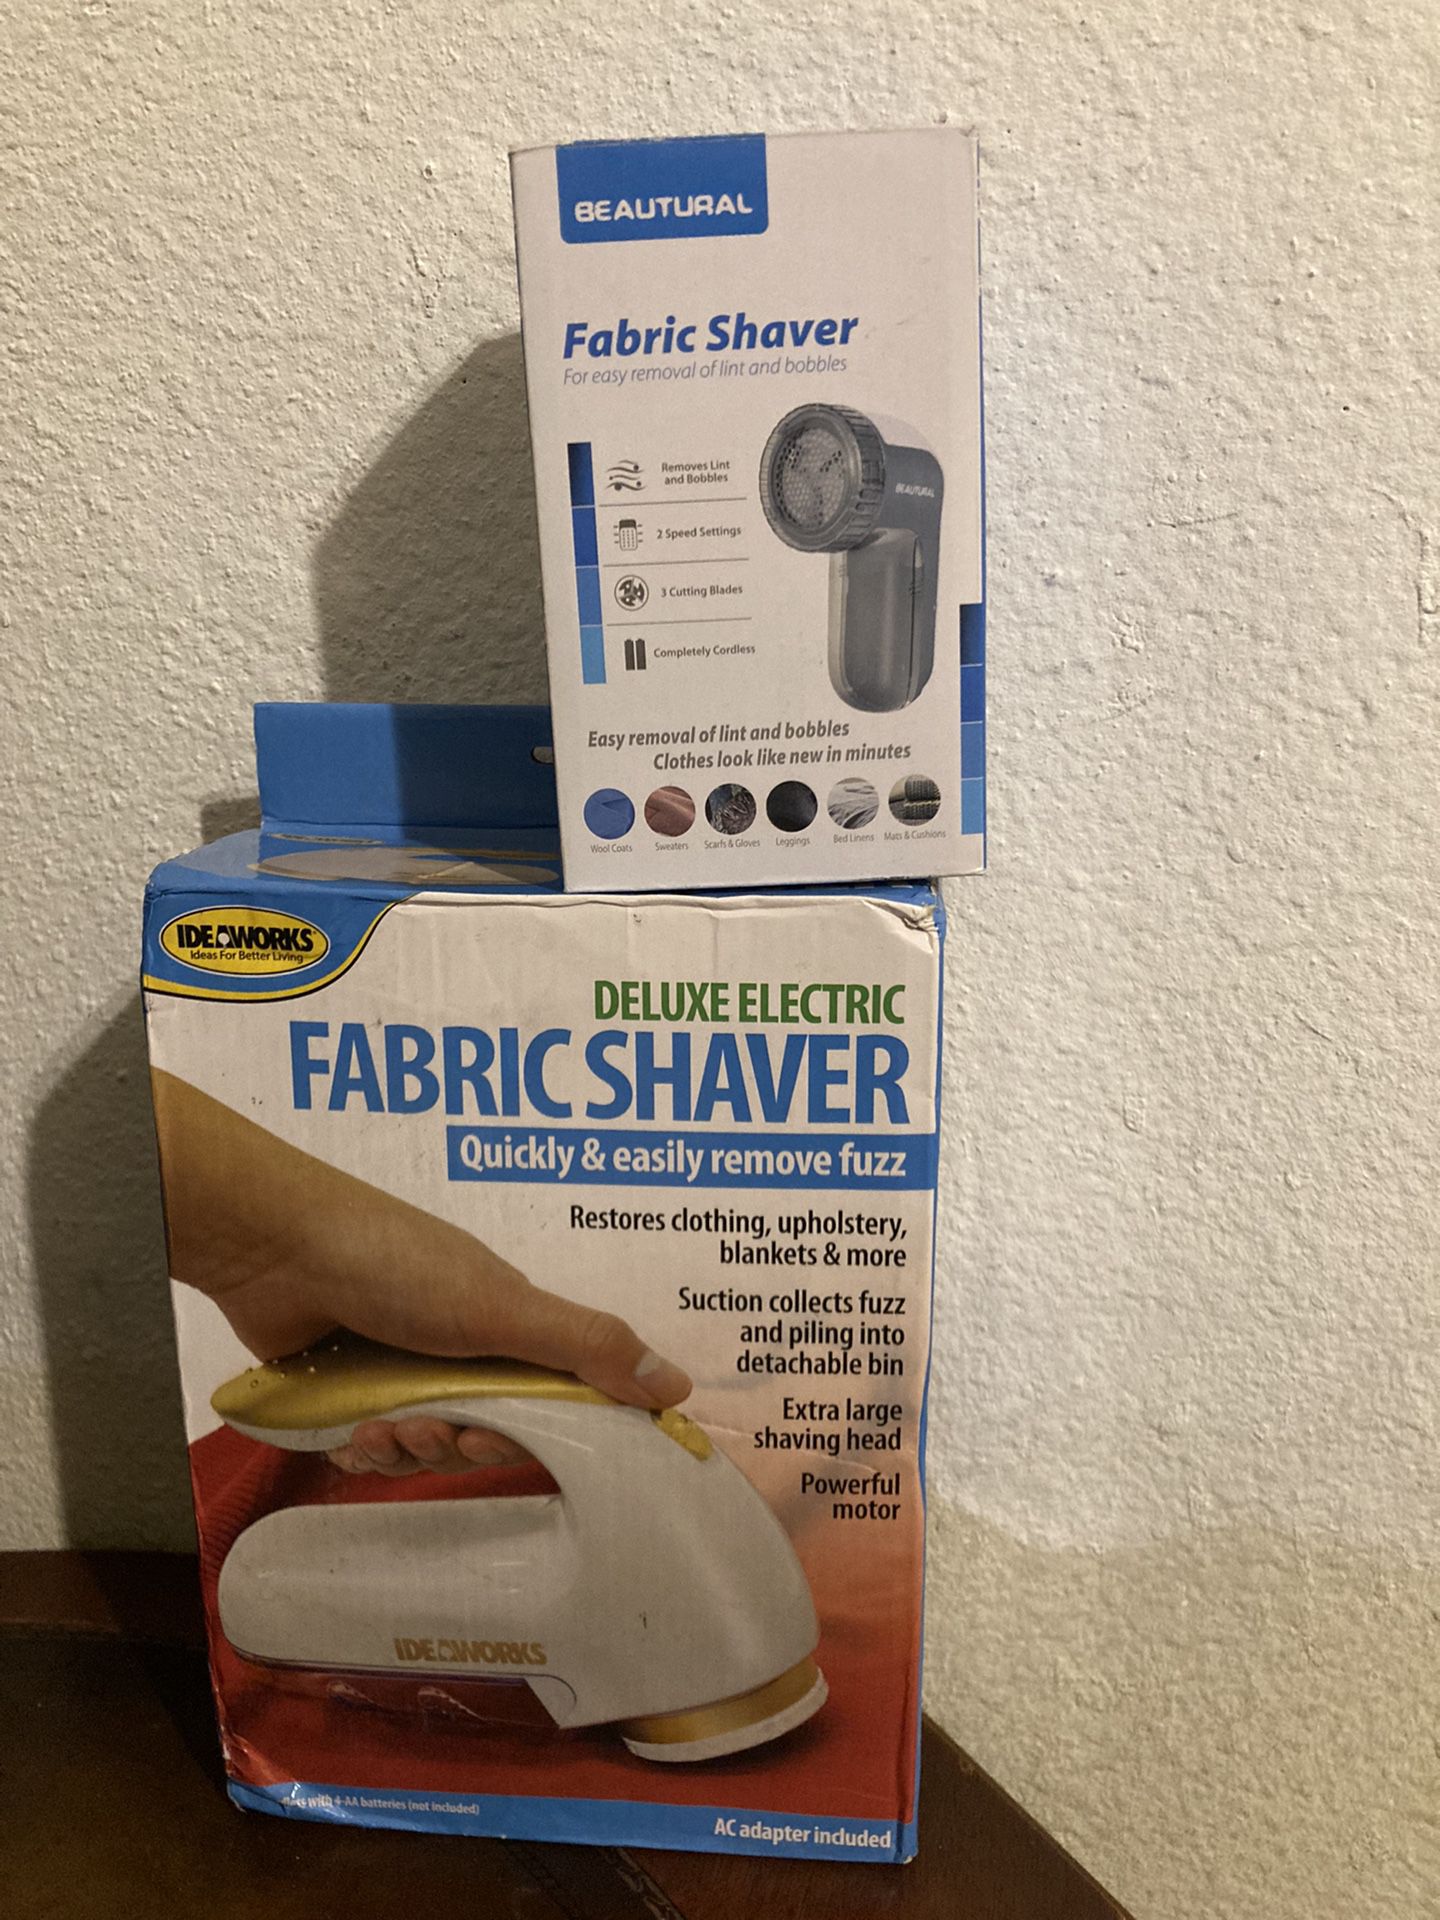 FABRIC SHAVER BOTH  TOGETHER 🌠🌠